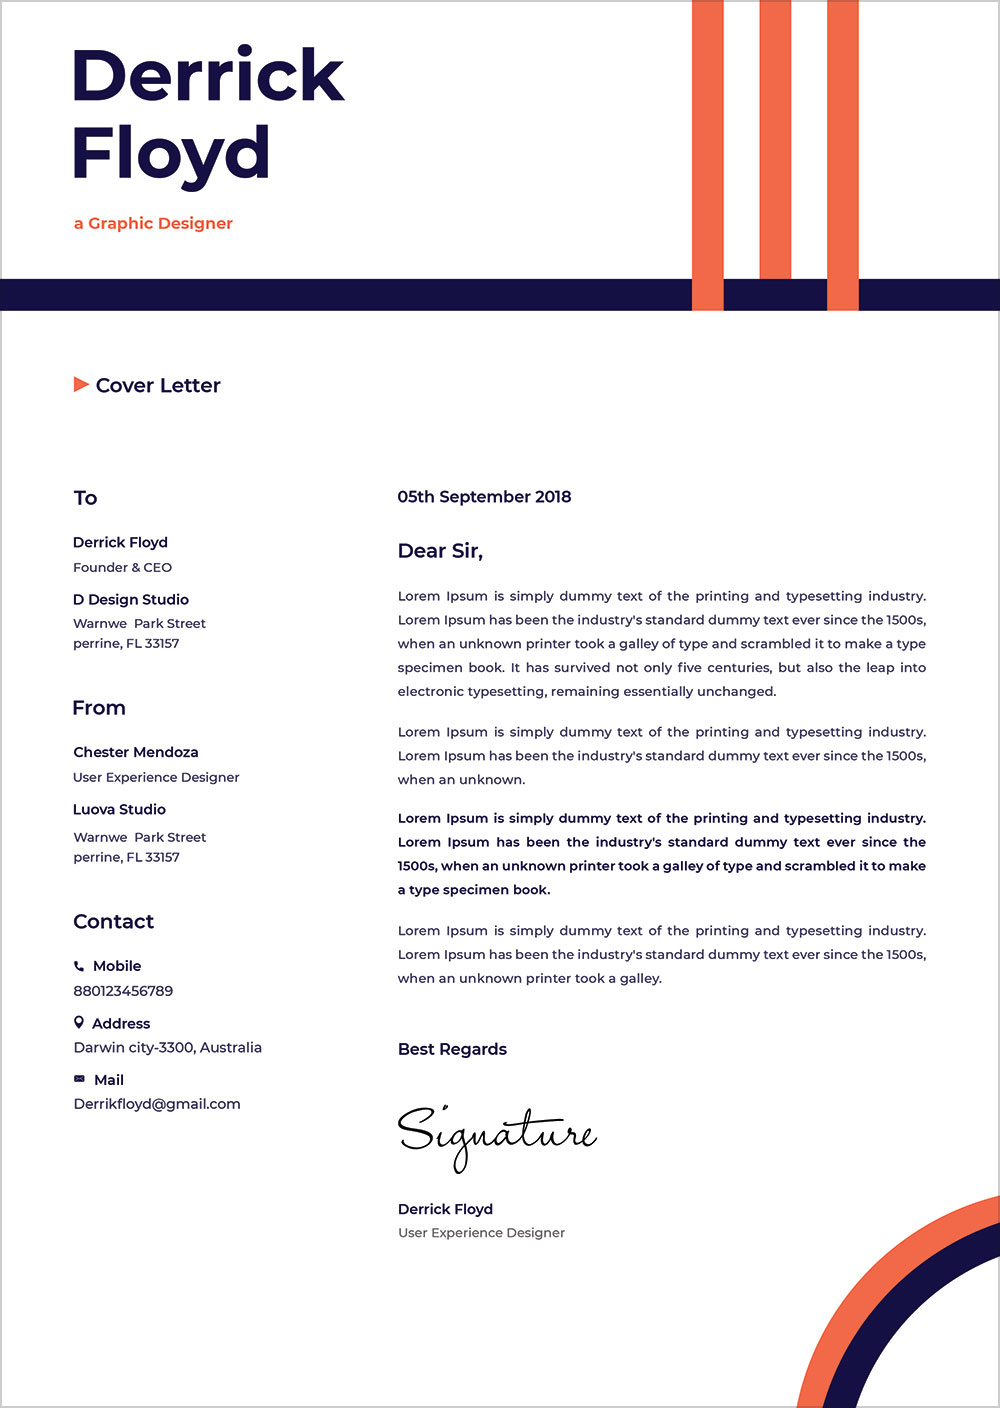 free professional cv   resume template  u0026 cover letter in word  psd  sketch  u0026 xd